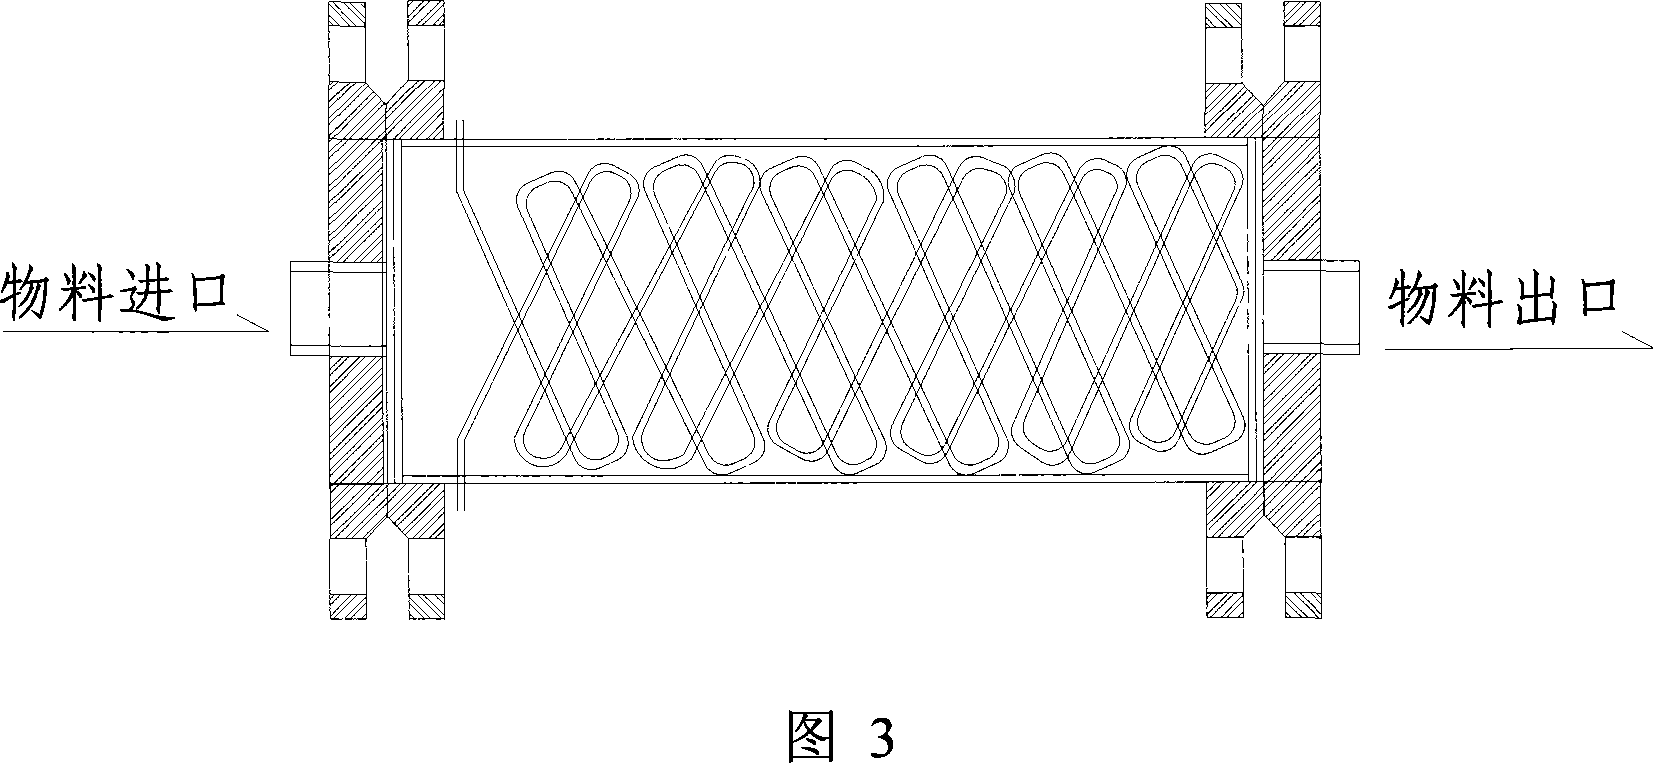 Device for industrialized microwave auxiliary hydrolysed starches and/or fuel alcohol production by cellulose